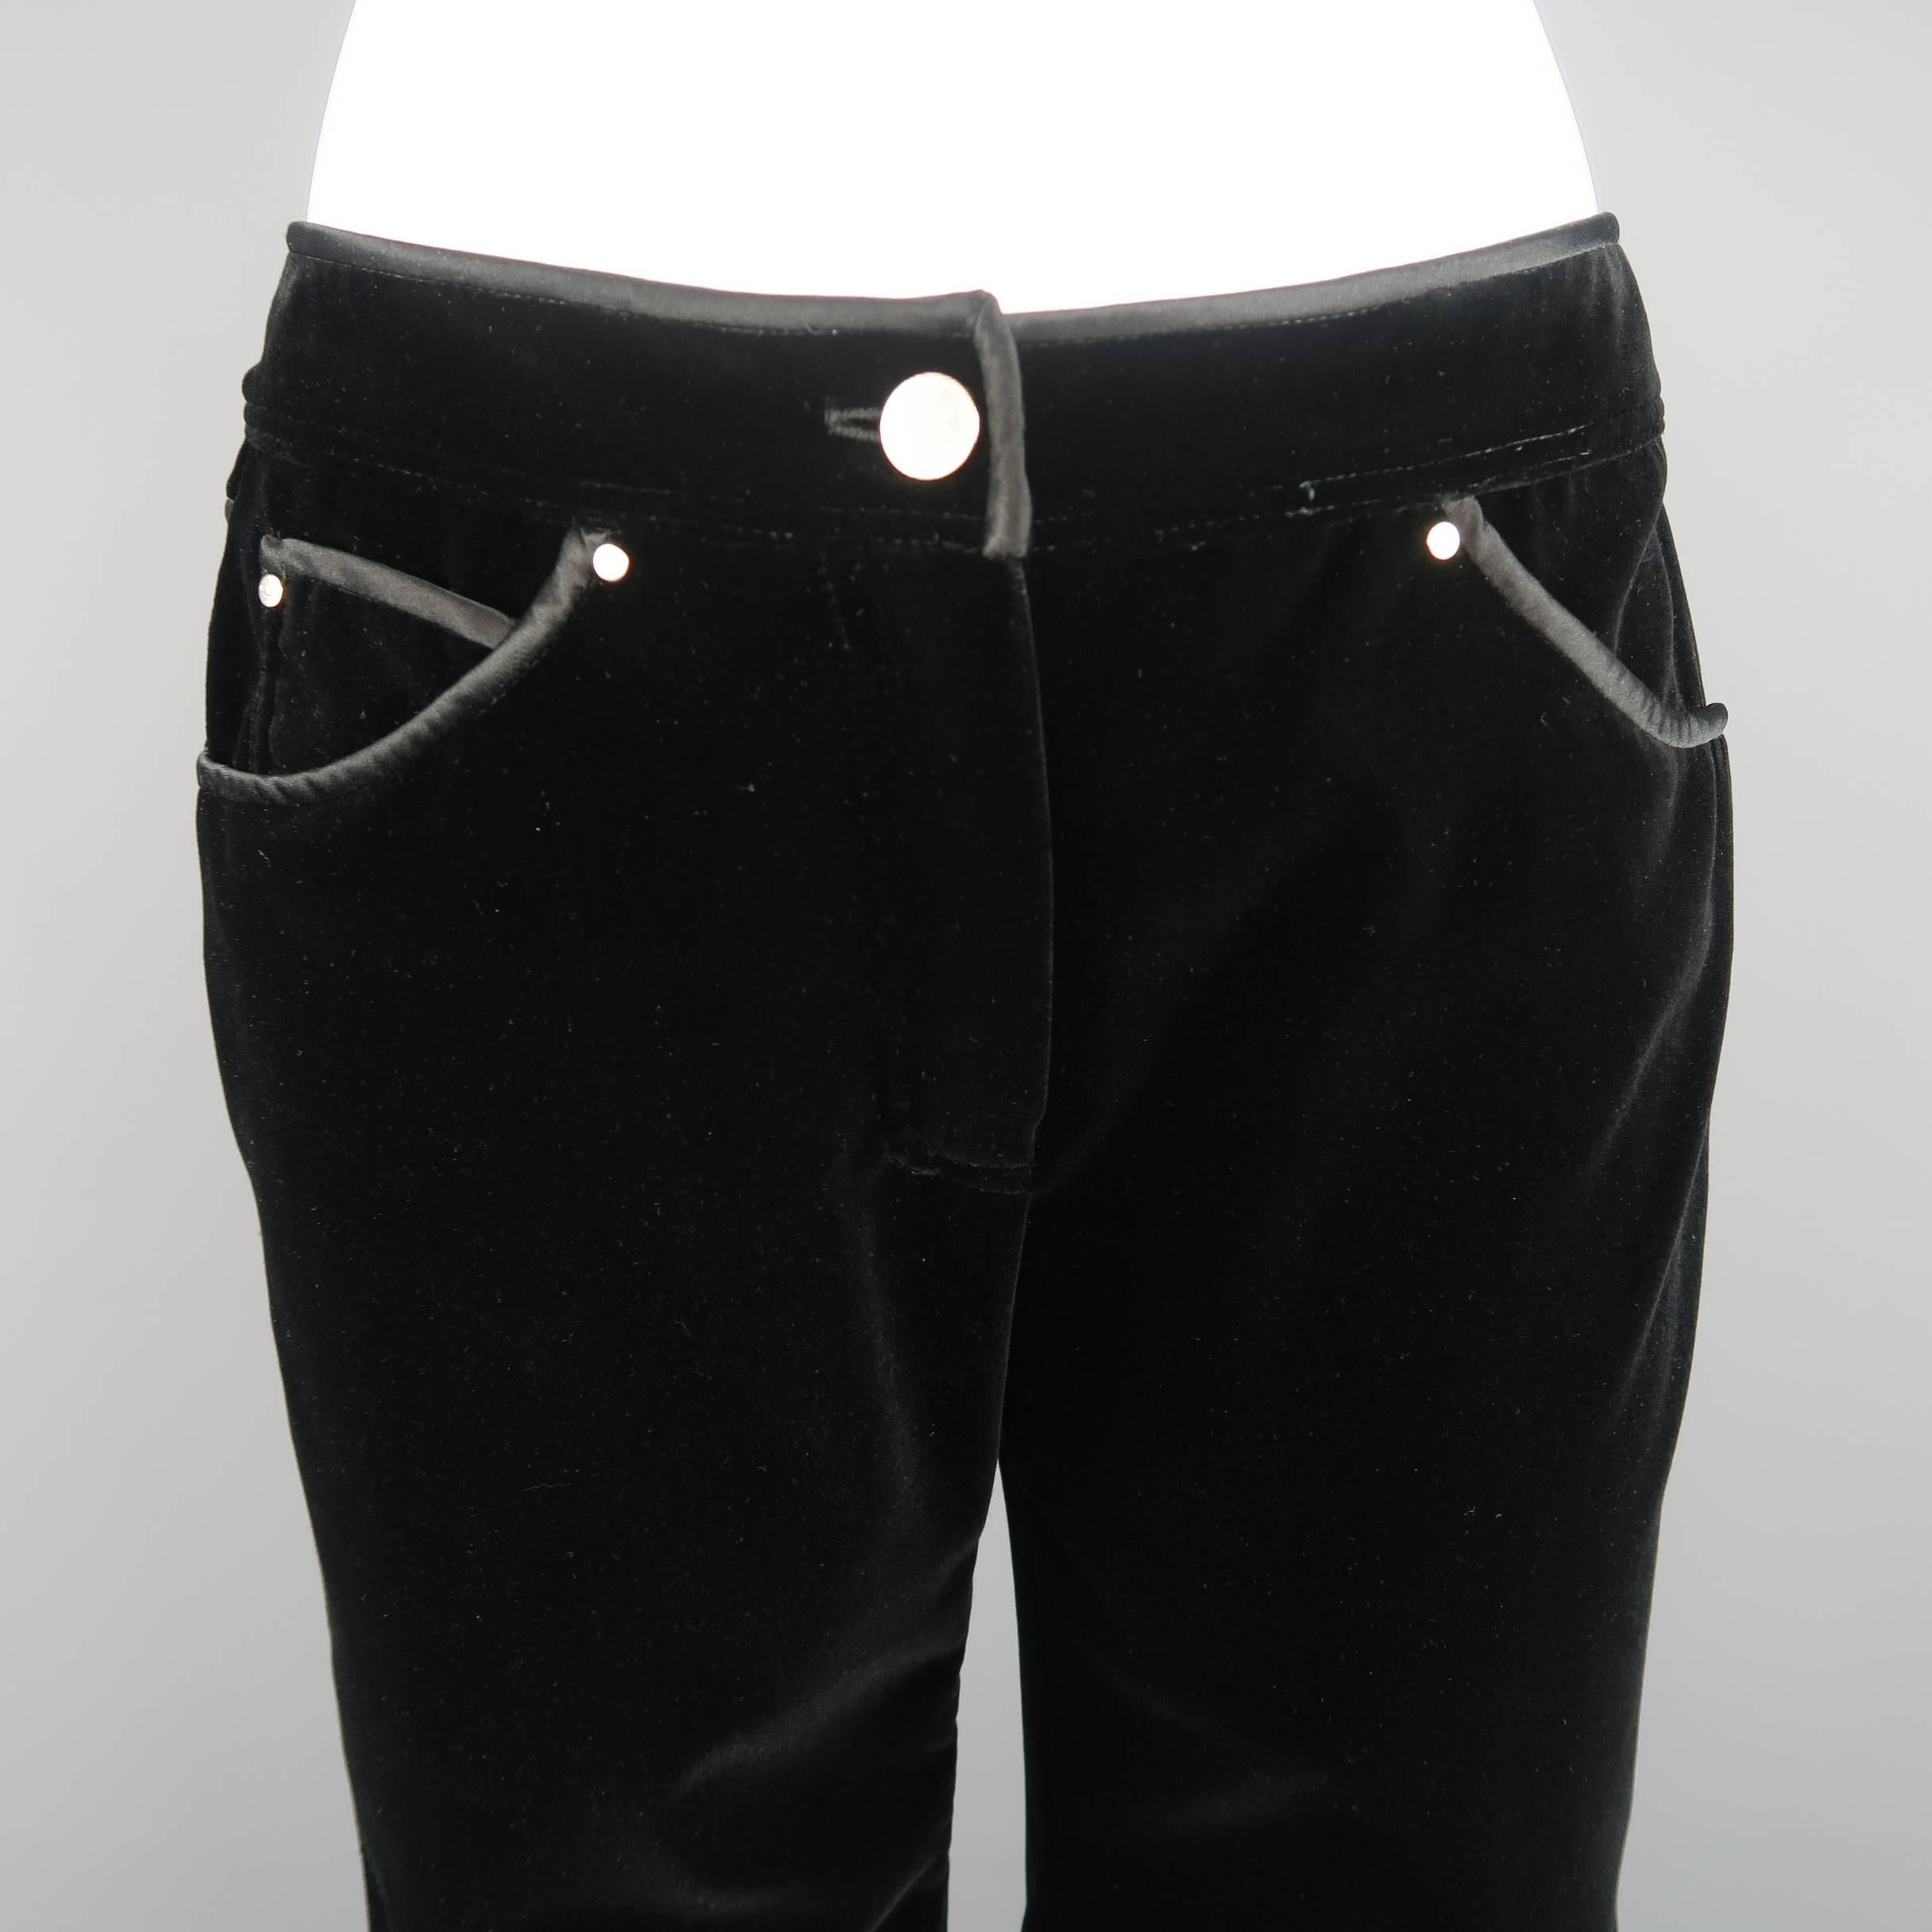 VALENTINO jeans come in plush black velvet and feature silk satin piping, simulated pockets, light gold tone hardware, V embroidered patch pockets, and a slim straight cut leg. Made in Italy.
 
Excellent Pre-Owned Condition.
Marked: 6
